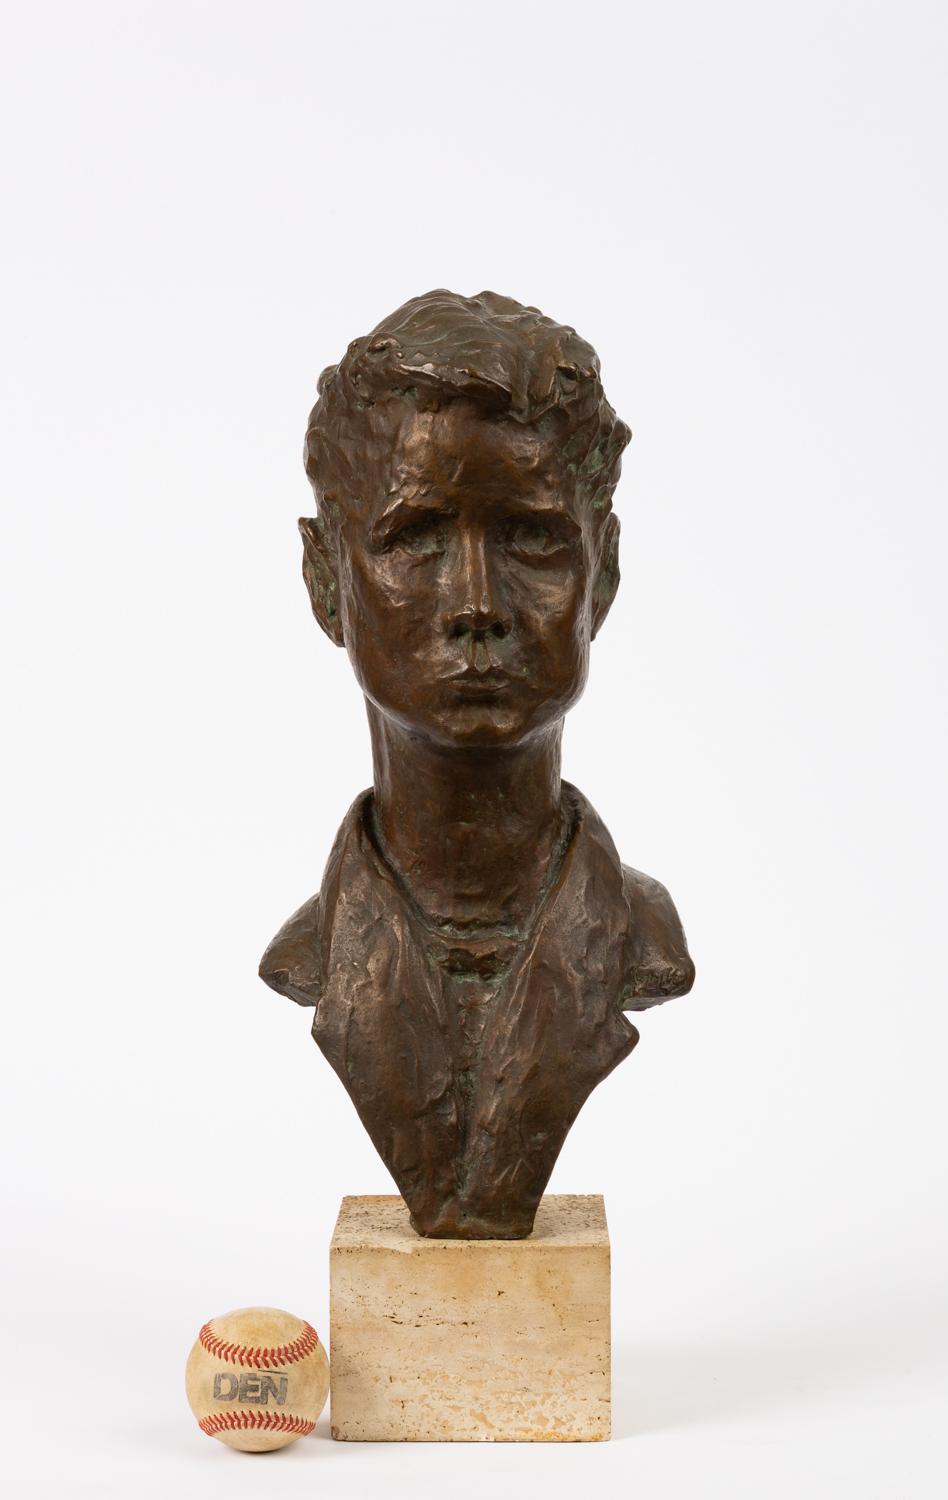 A likeness of a young man or teen with a mid-20th century hairstyle and clothing, rendered in high detail and cast in bronze. The figure is cantilevered along the lapels of its jacket, and bolted to a square base of travertine limestone. The